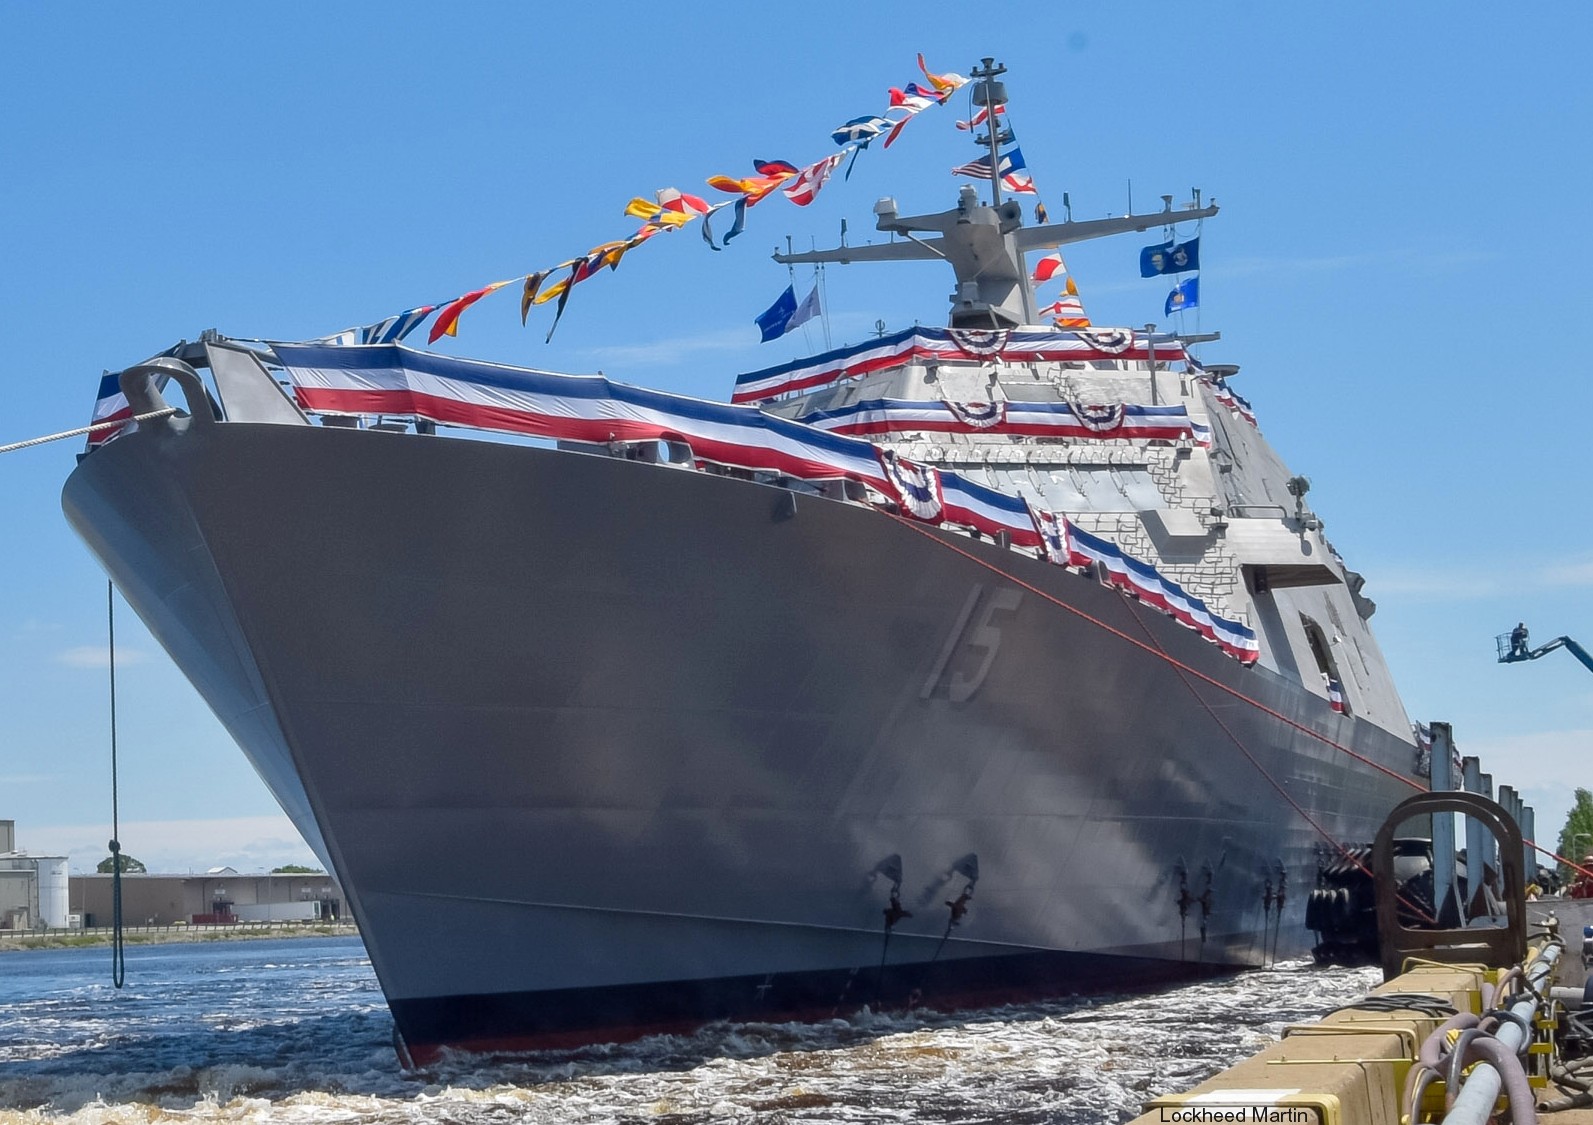 lcs-15 uss billings freedom class littoral combat ship us navy 48 christening launching